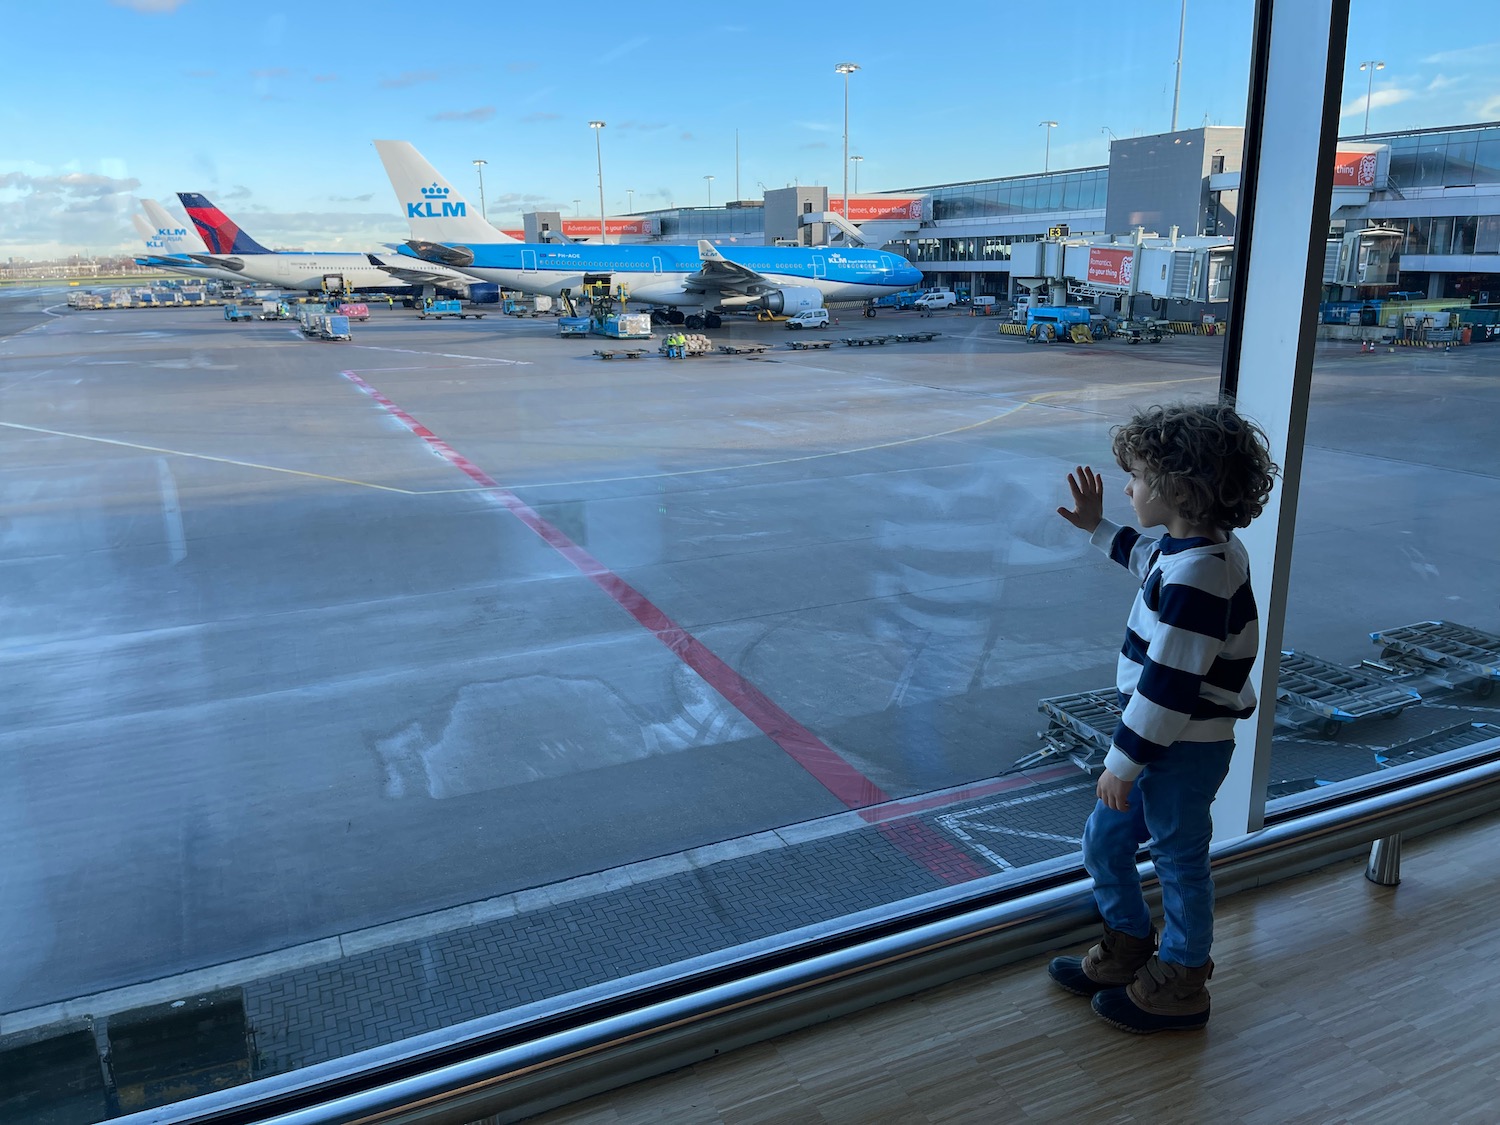 a child looking out a window at airplanes